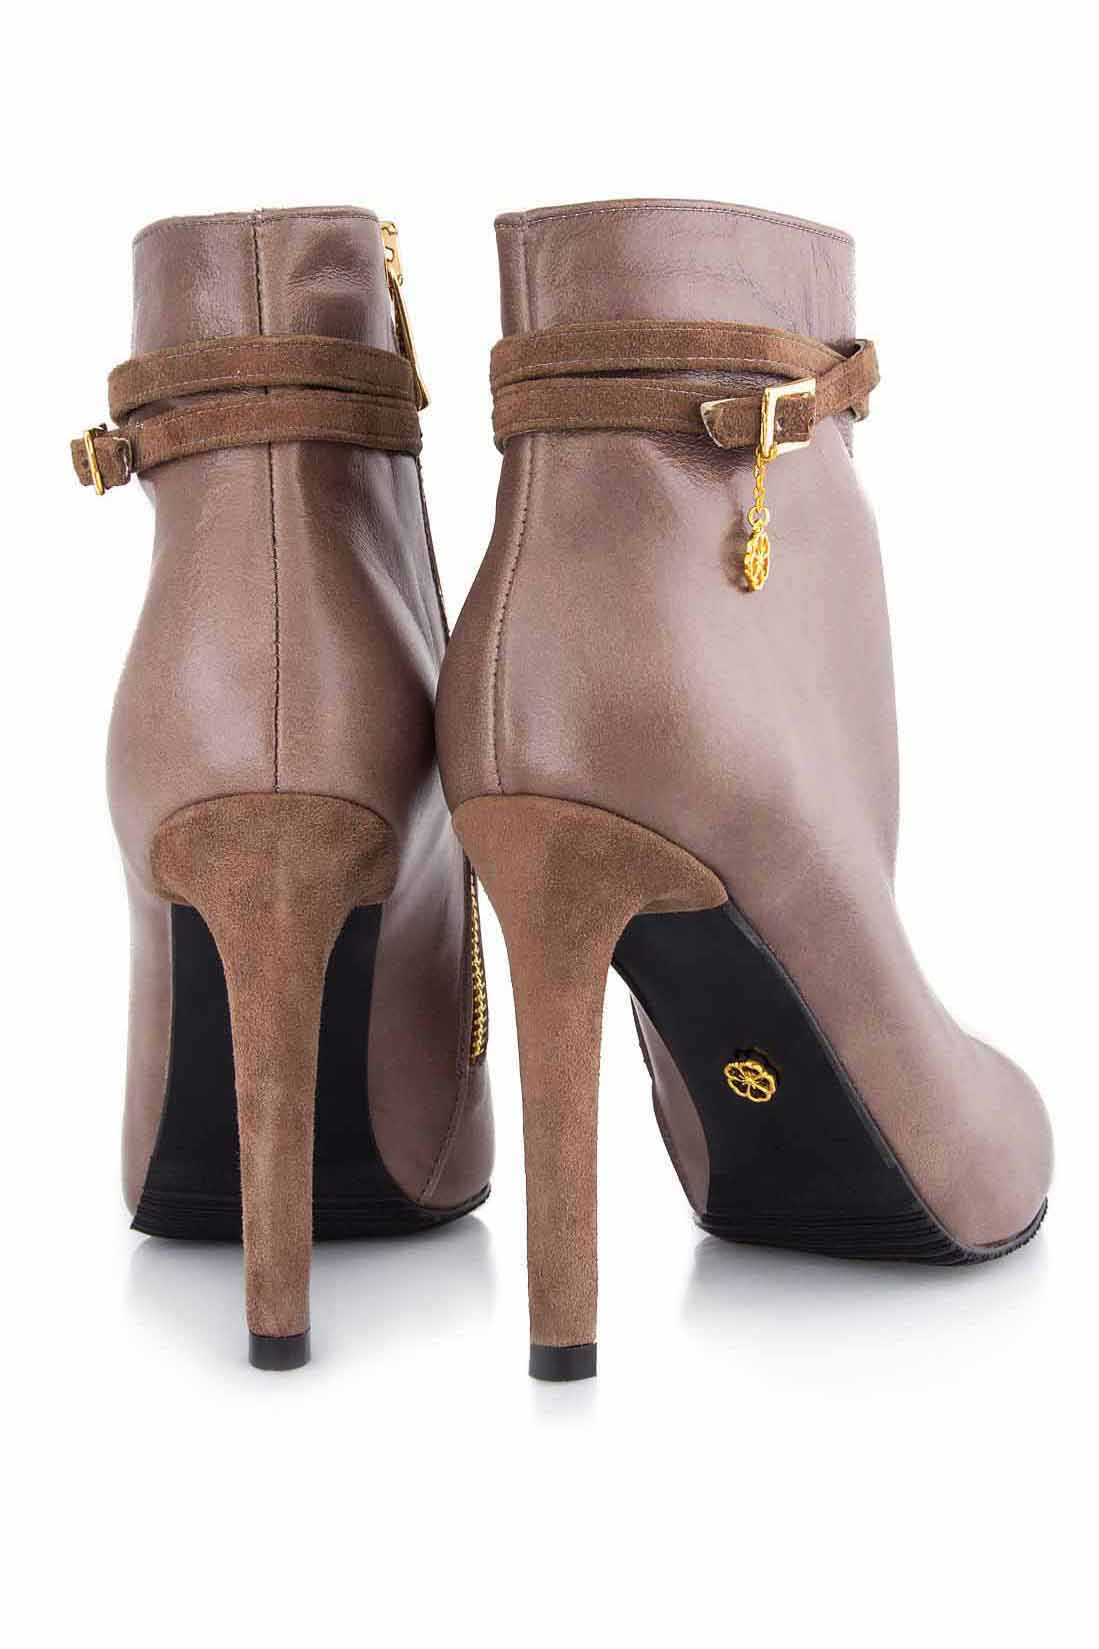 'Sunny Autumn Day' leather ankle boots Hannami image 2